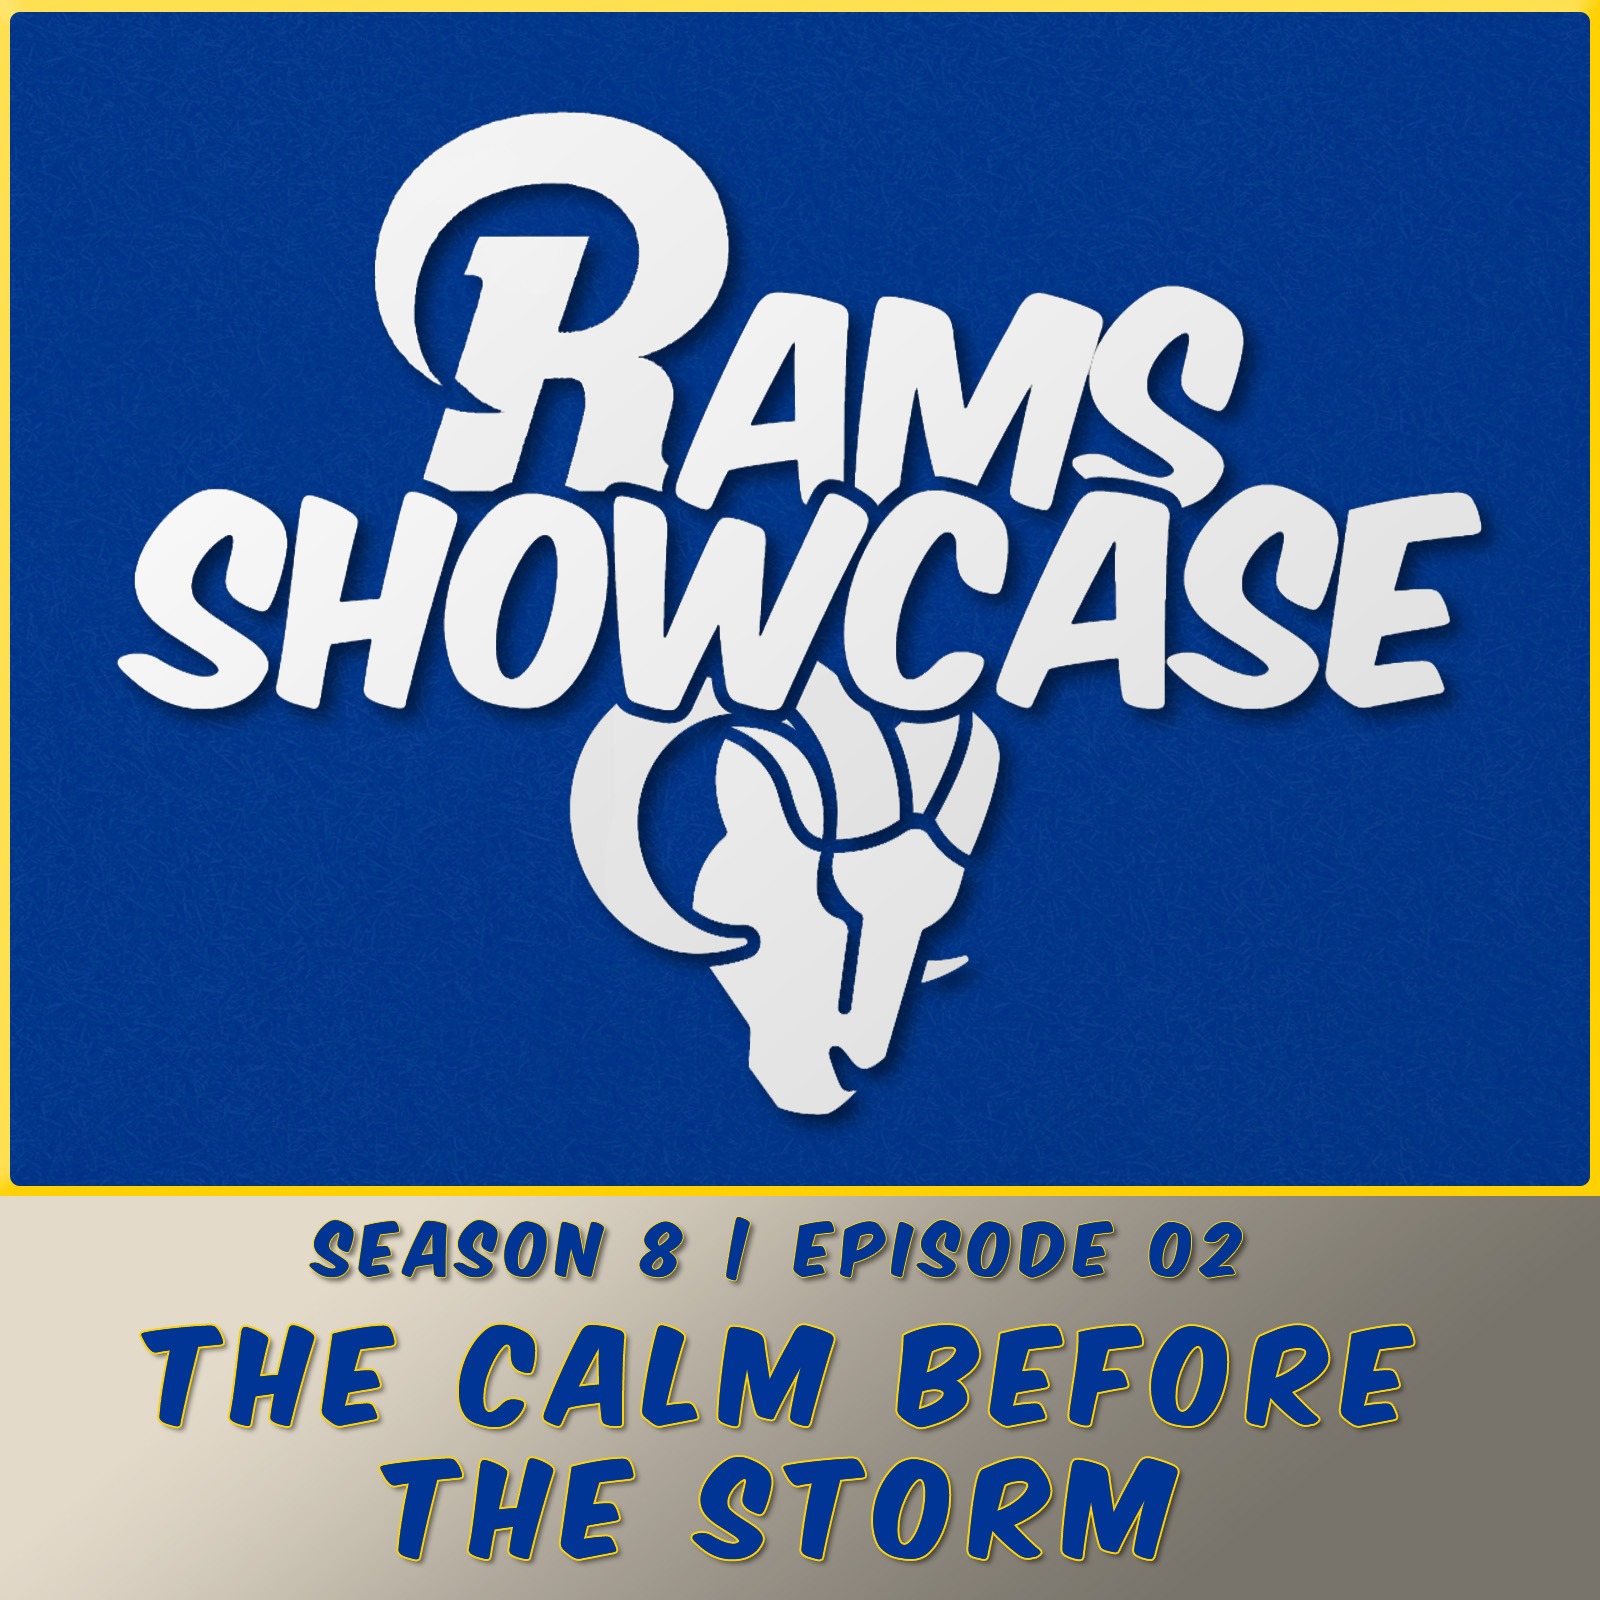 Episode 02 - The Calm Before the Storm